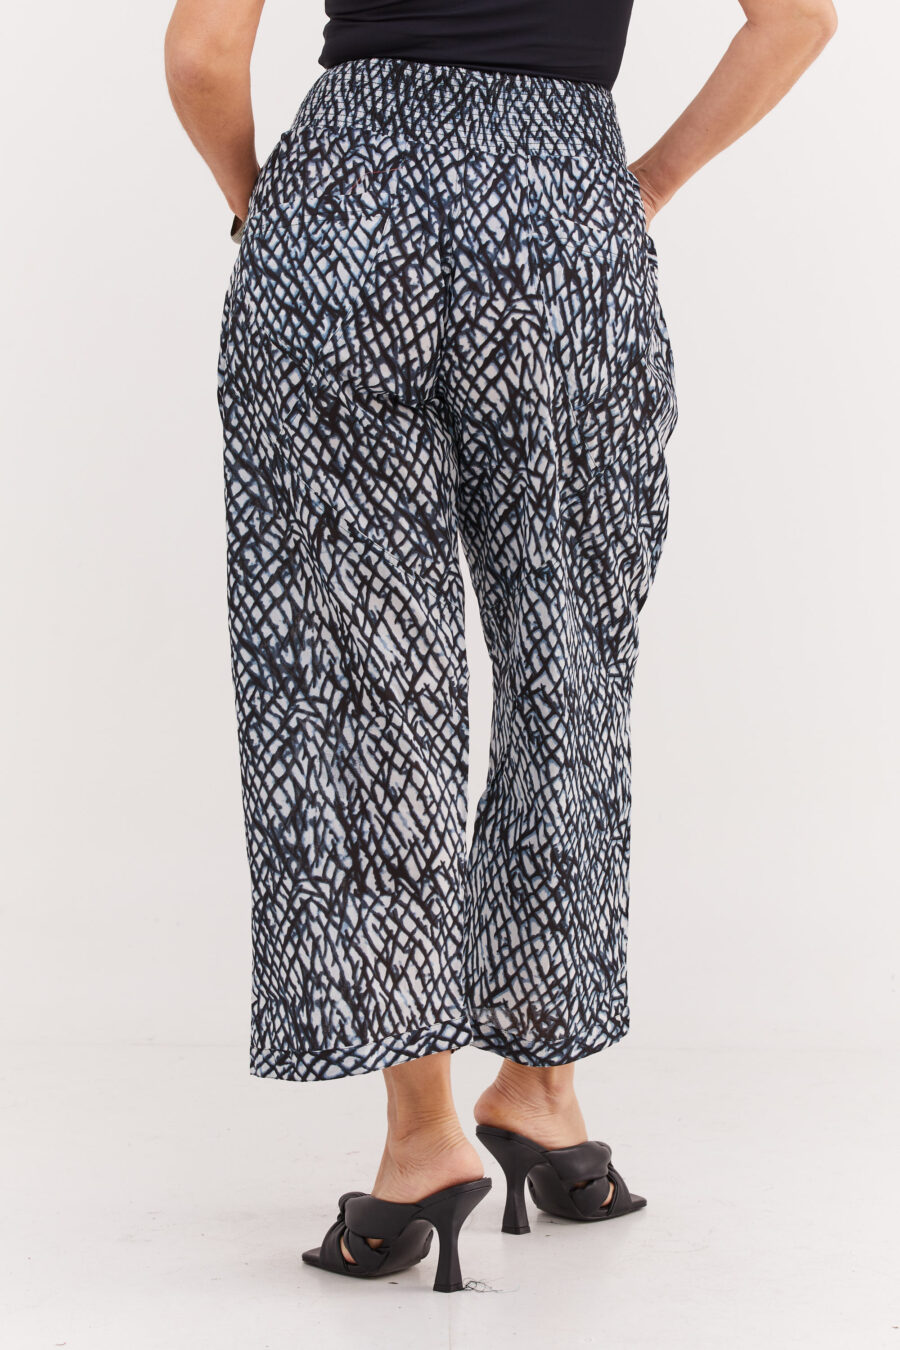 Harmony pants | Flattering and comfortable pants – Black crush print, white pants with black and light blue mesh print by Comfort Zone Boutique